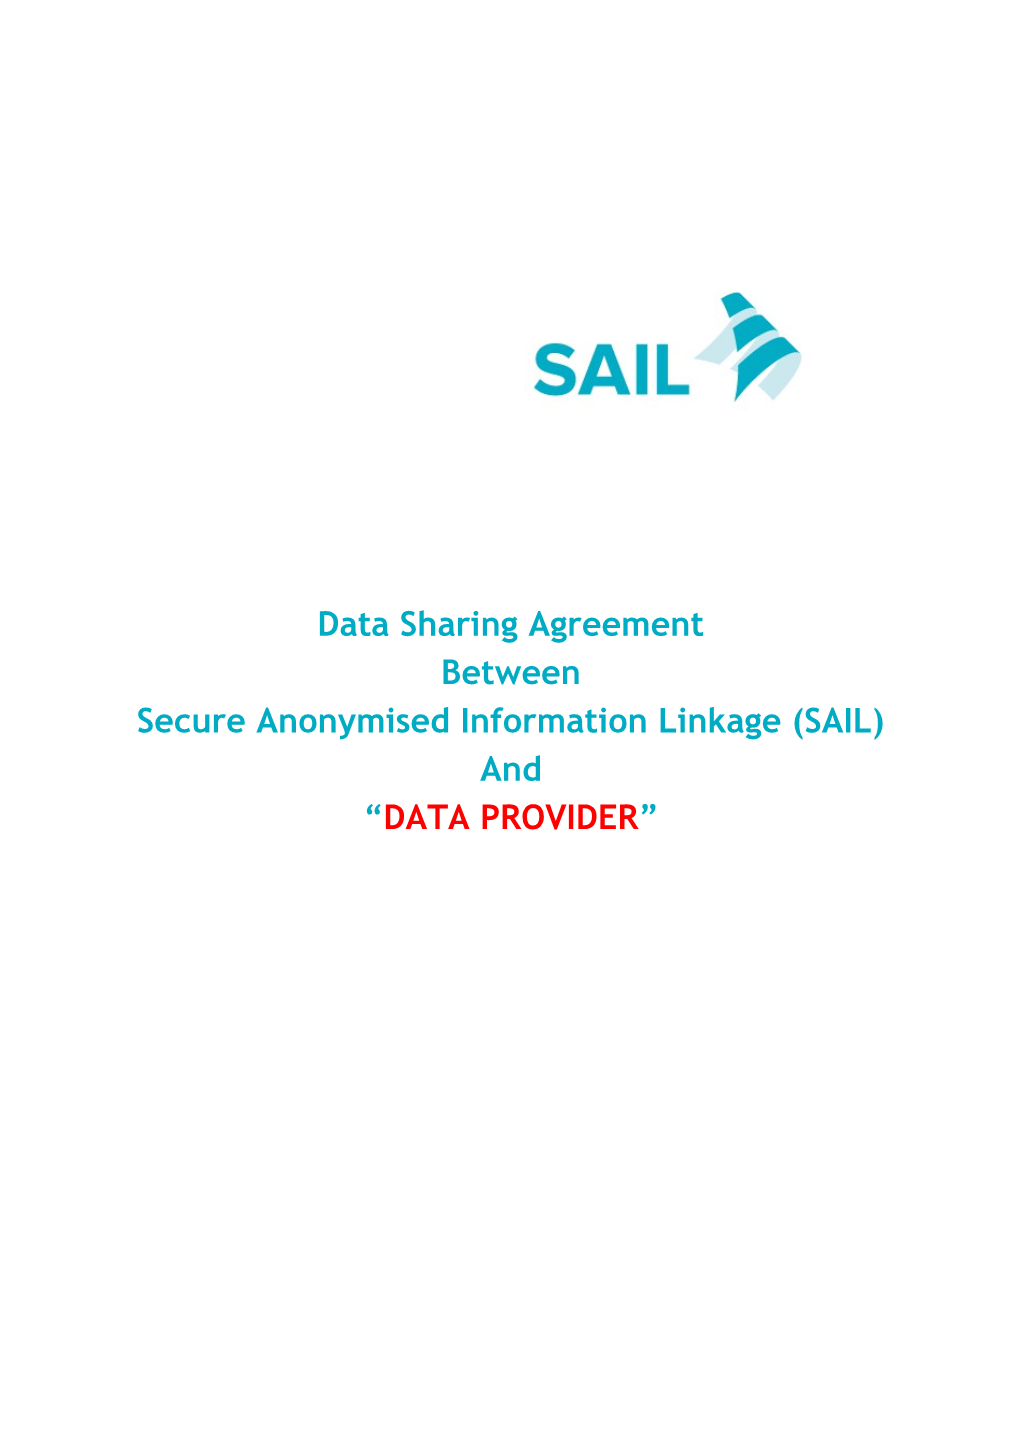 Secure Anonymised Information Linkage (SAIL)